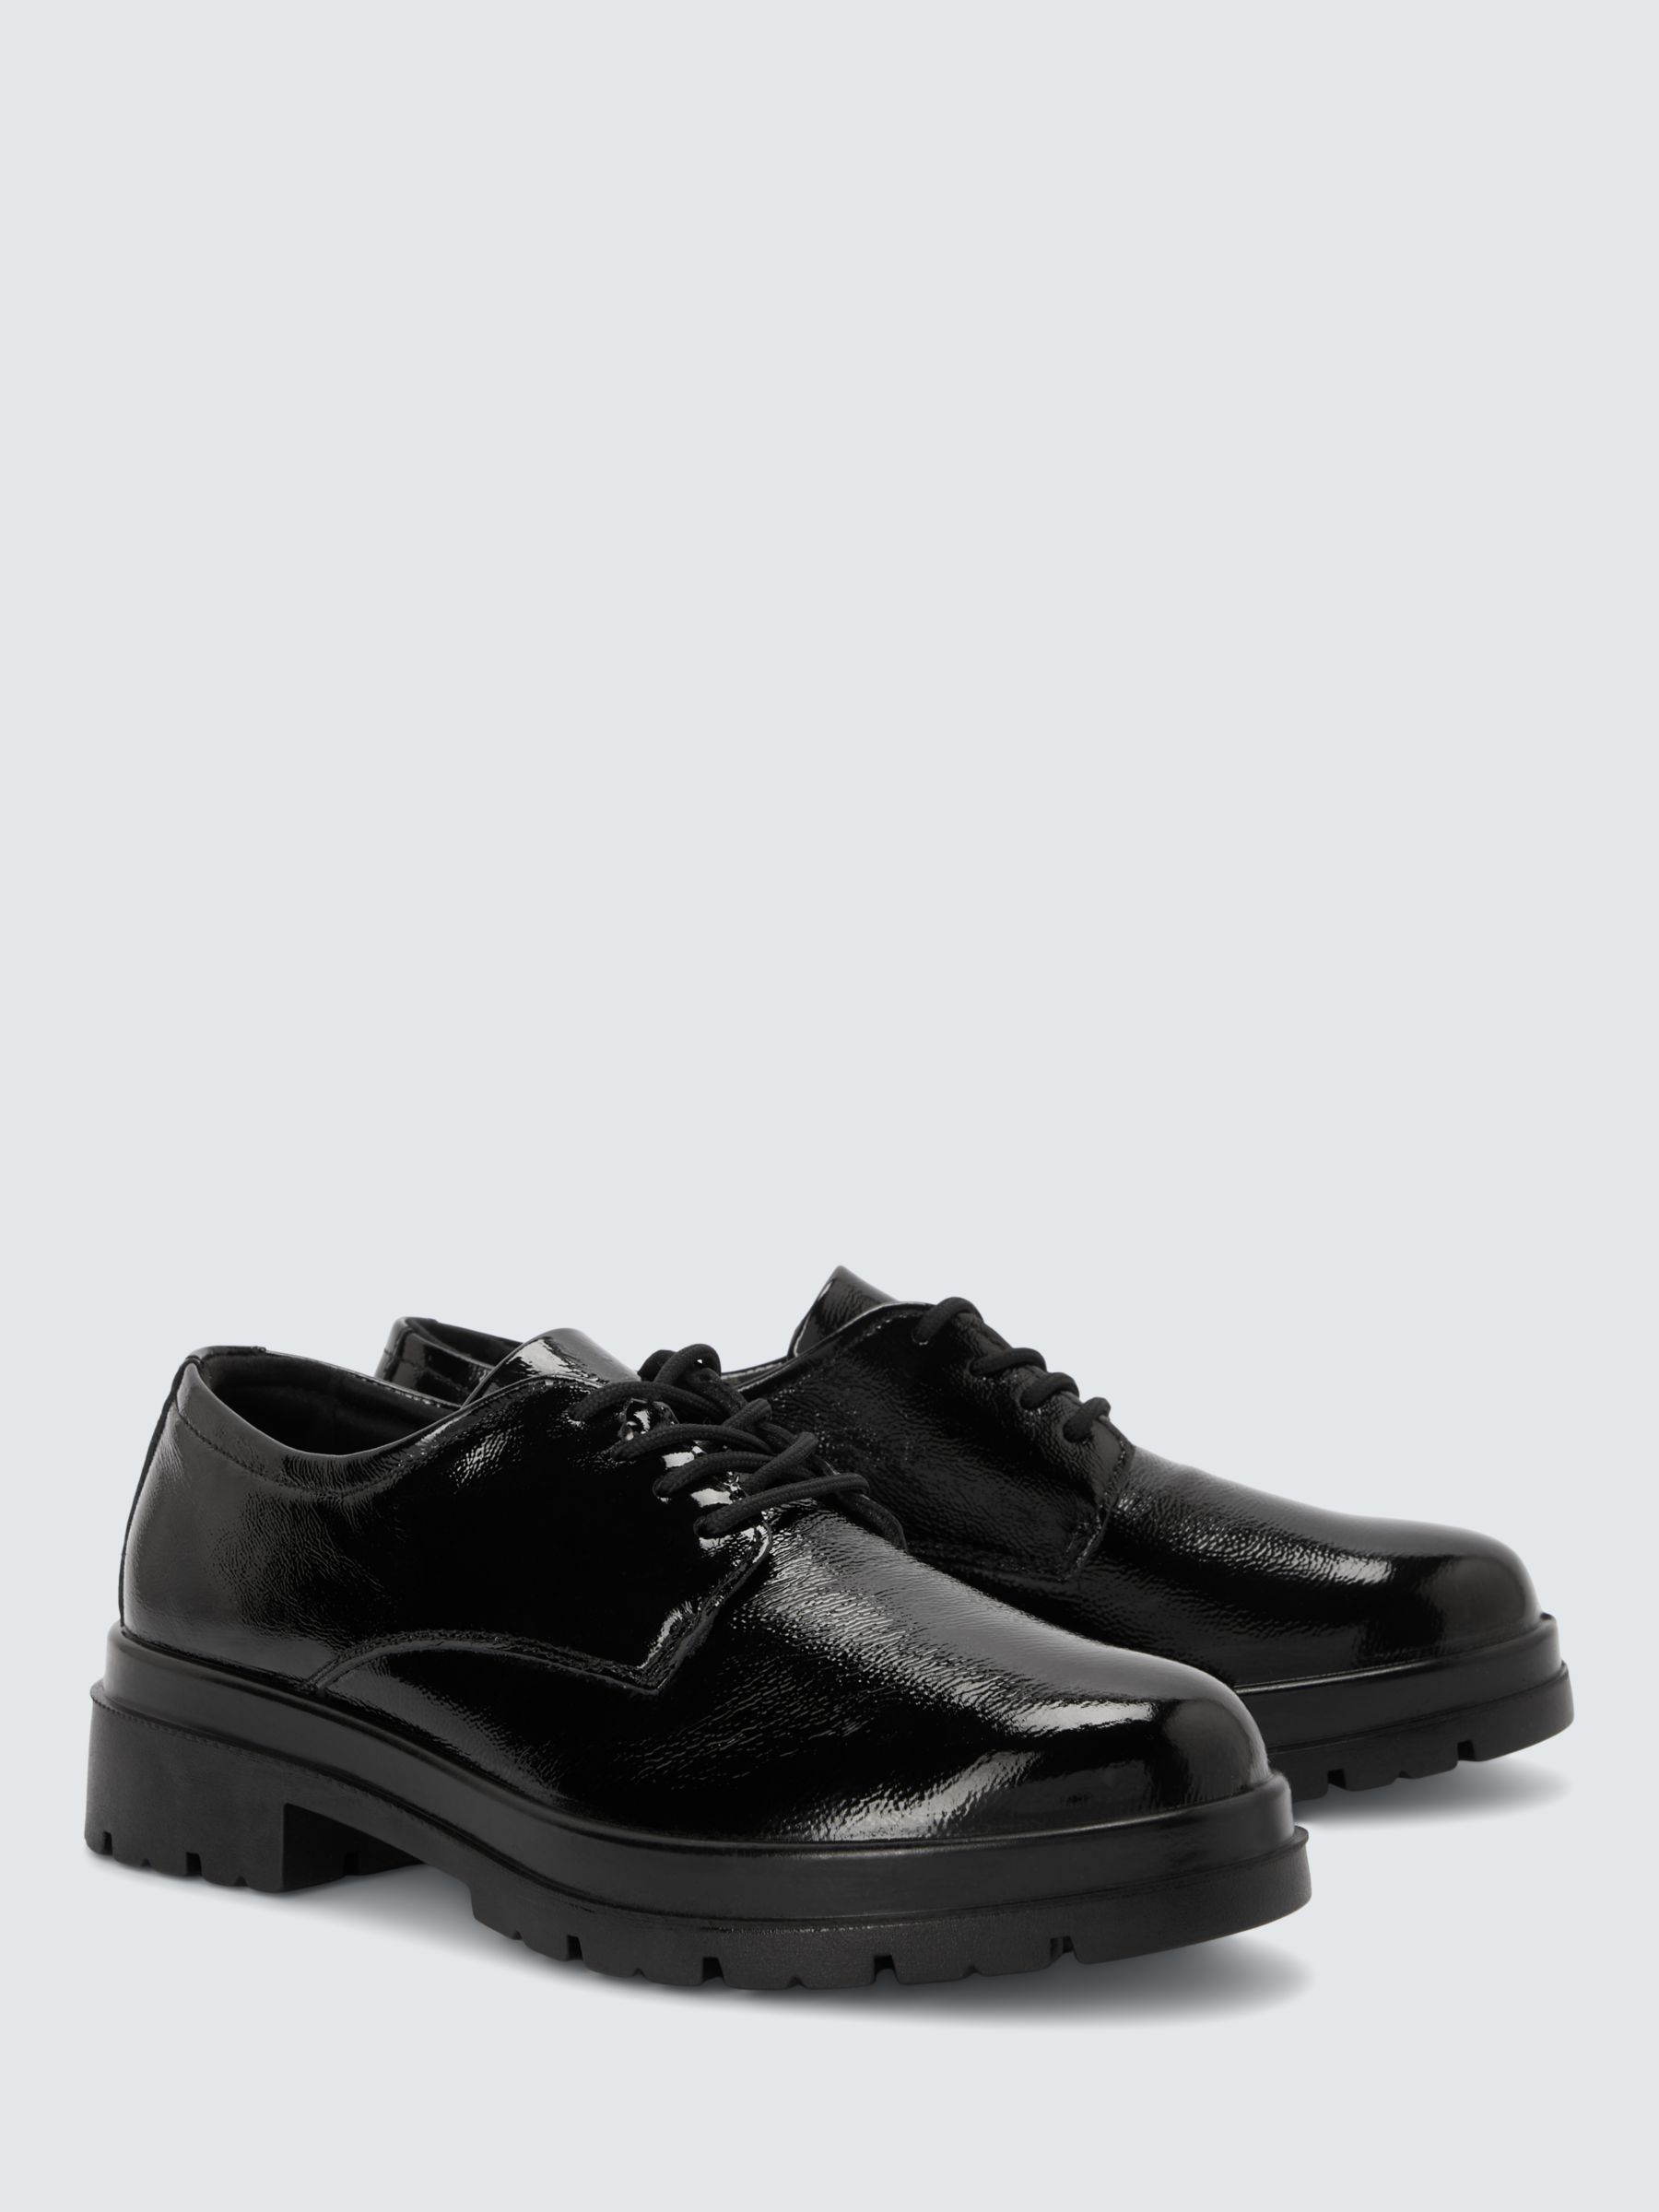 John Lewis Fifie Leather Comfort Lace Up Oxford Shoes, Black at John Lewis  & Partners